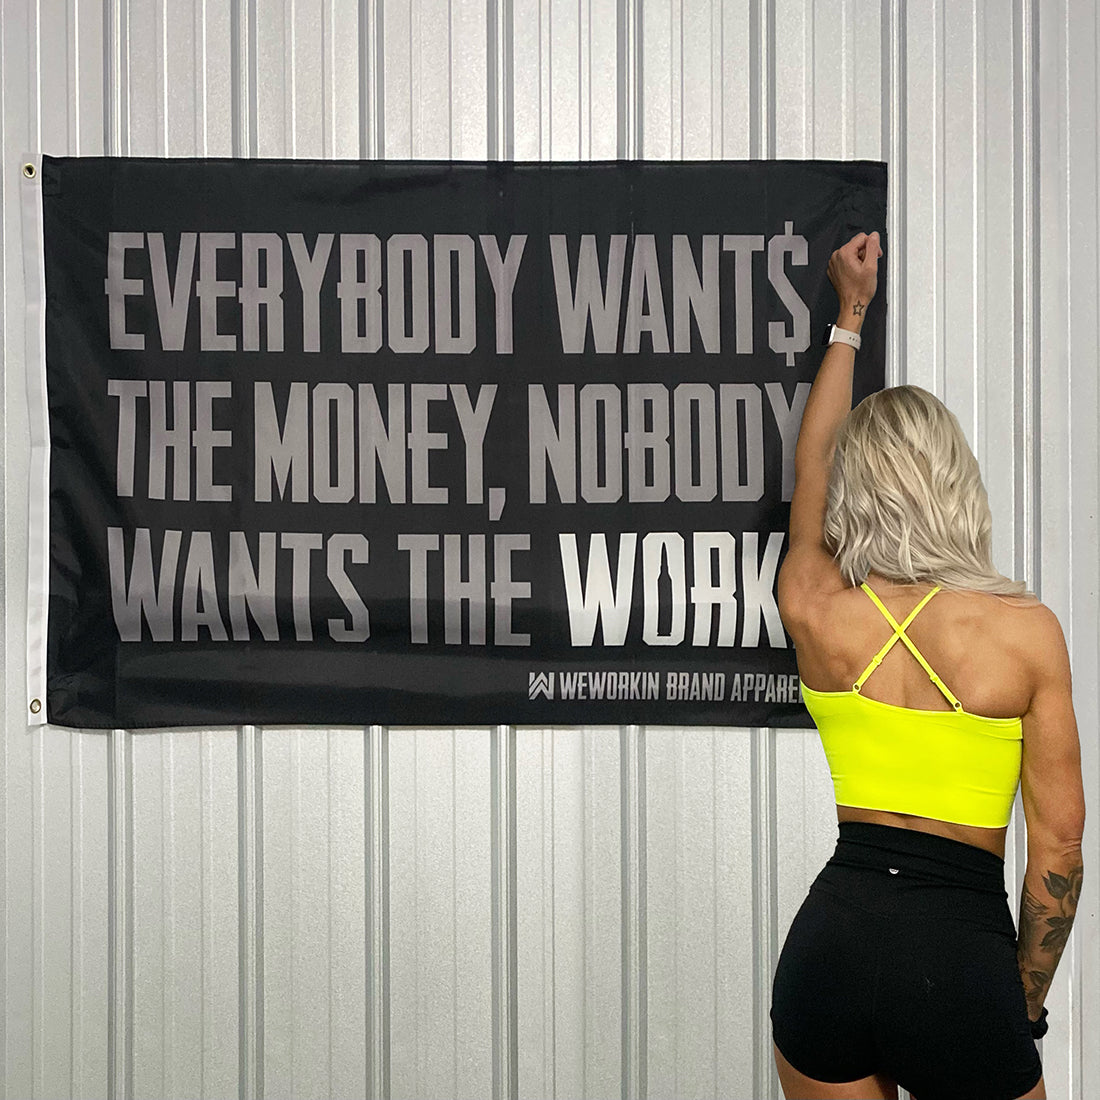 WeWorkin Brand "Everybody Wants the Money, Nobody Wants the WORK." flag displayed on a corrugated metal wall. Each flag measures 5'w x 3'h, black background with all grey letters except for the word "WORK" which is in white. White, double-stitched, thicker left edge for durability, (2) gold grommets (one at top left and one at bottom left corners).